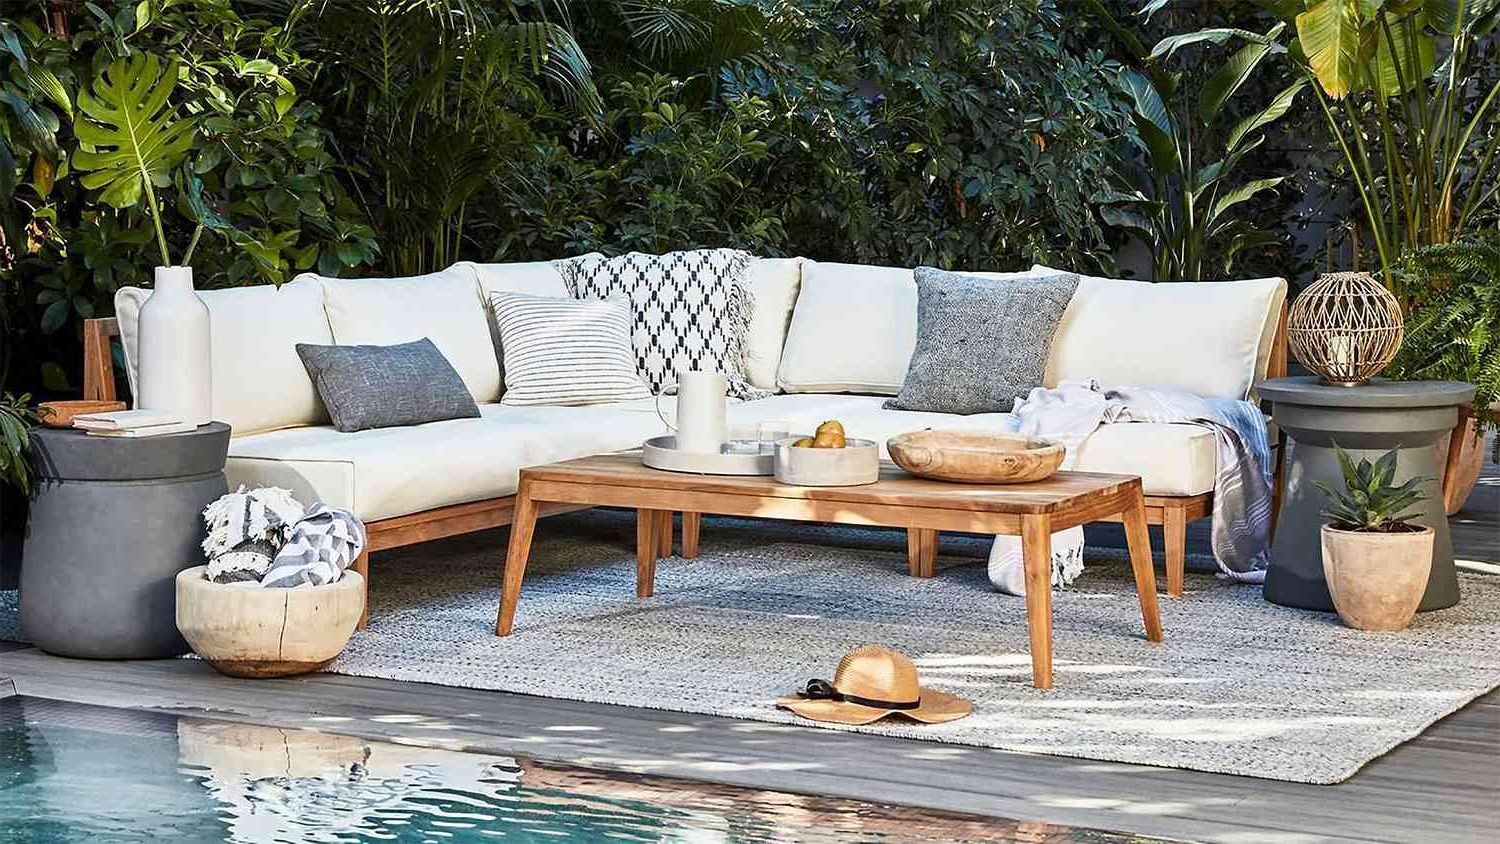 Most Popular Outer's Outdoor Sectional Is More Comfortable Than My Indoor Couch Intended For Outdoor Couch Cushions, Throw Pillows And Slat Coffee Table (View 5 of 15)